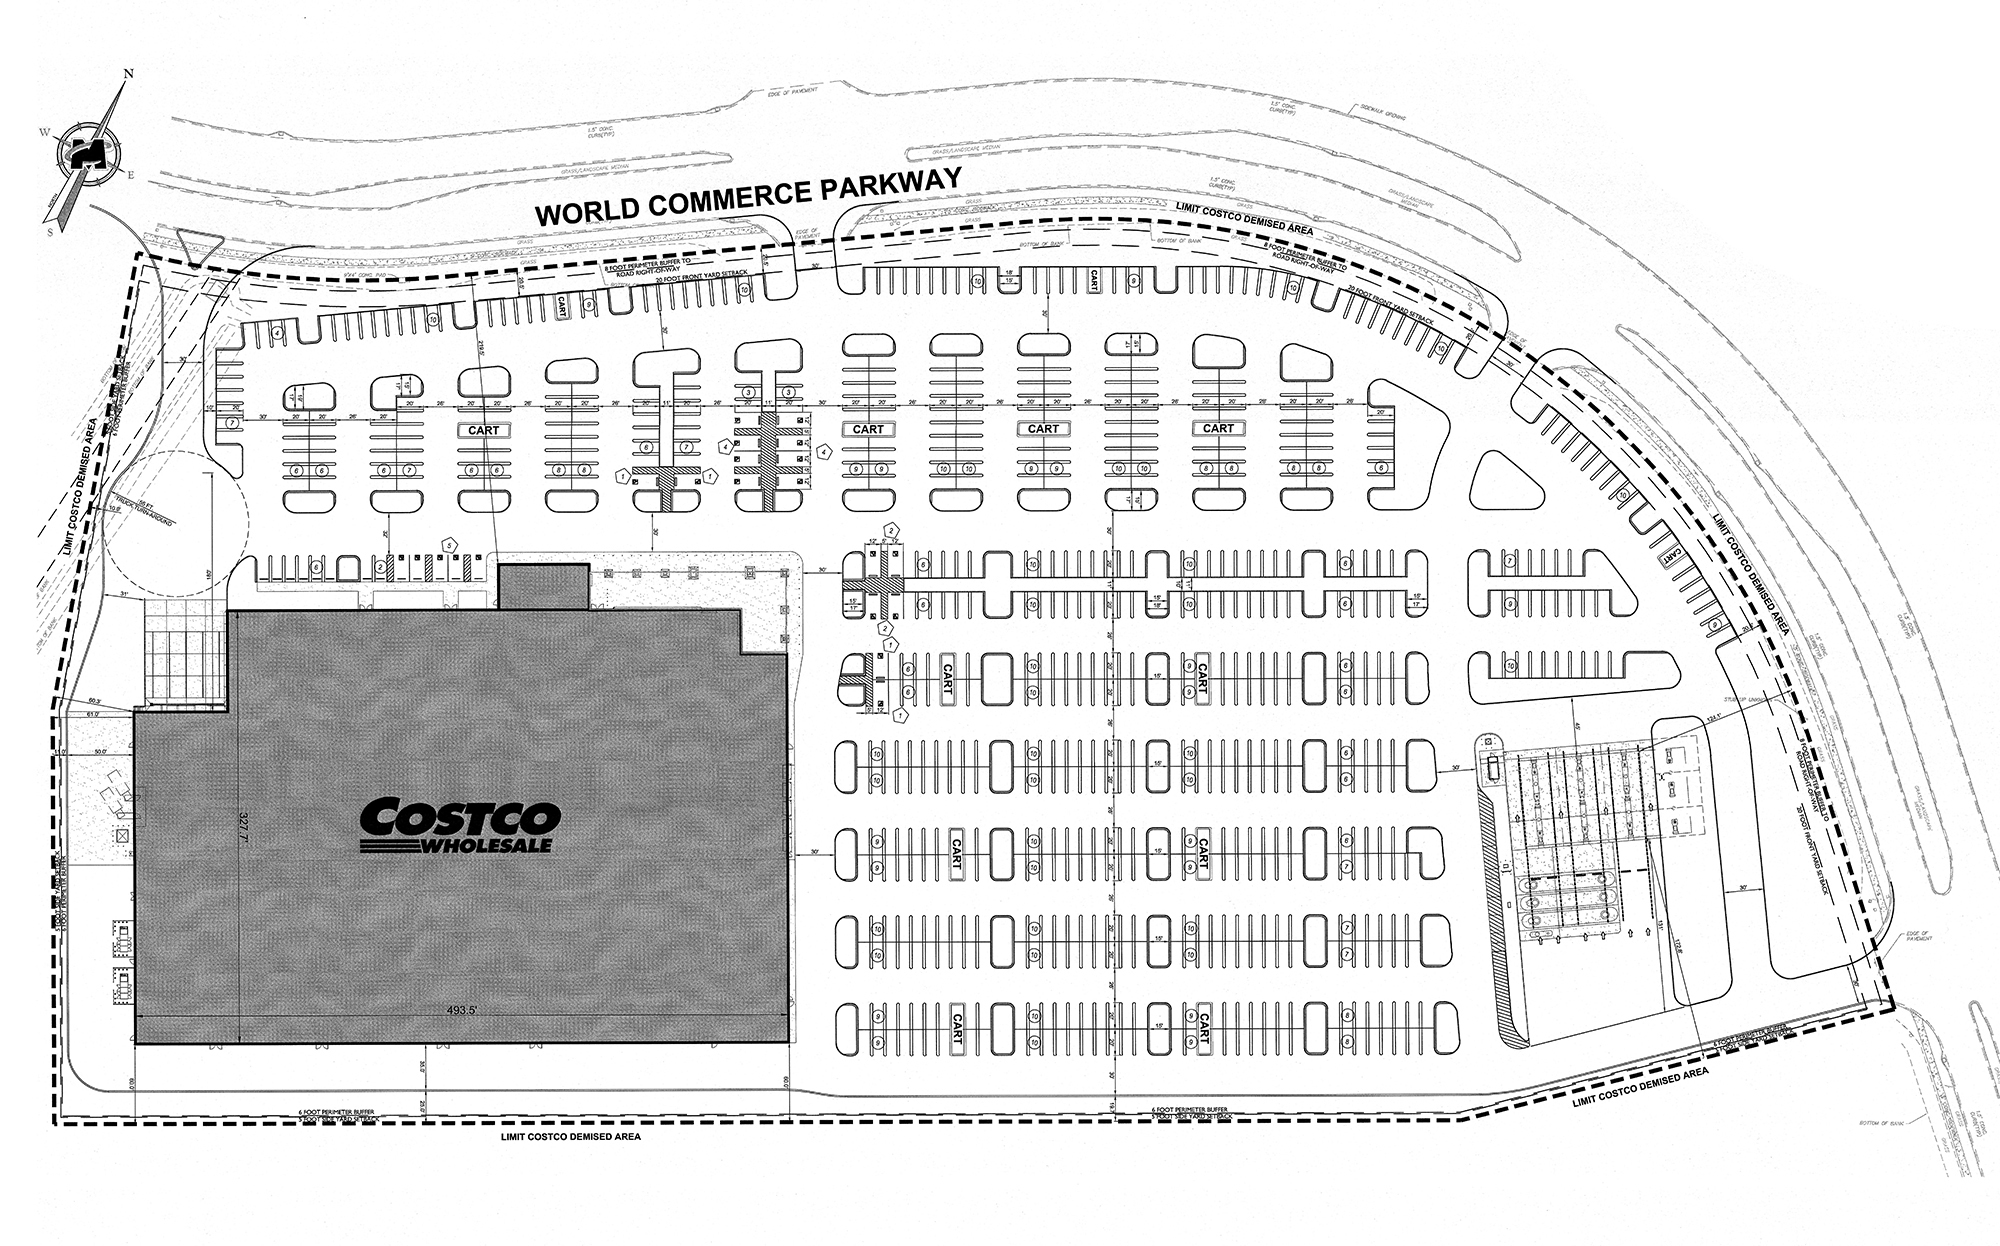 The Gray engineering, design and construction firm in Lexington, Kentucky, will build the 157,317-square-foot wholesale club at a cost of $13.5 million at 215 World Commerce Parkway in St. Augustine.